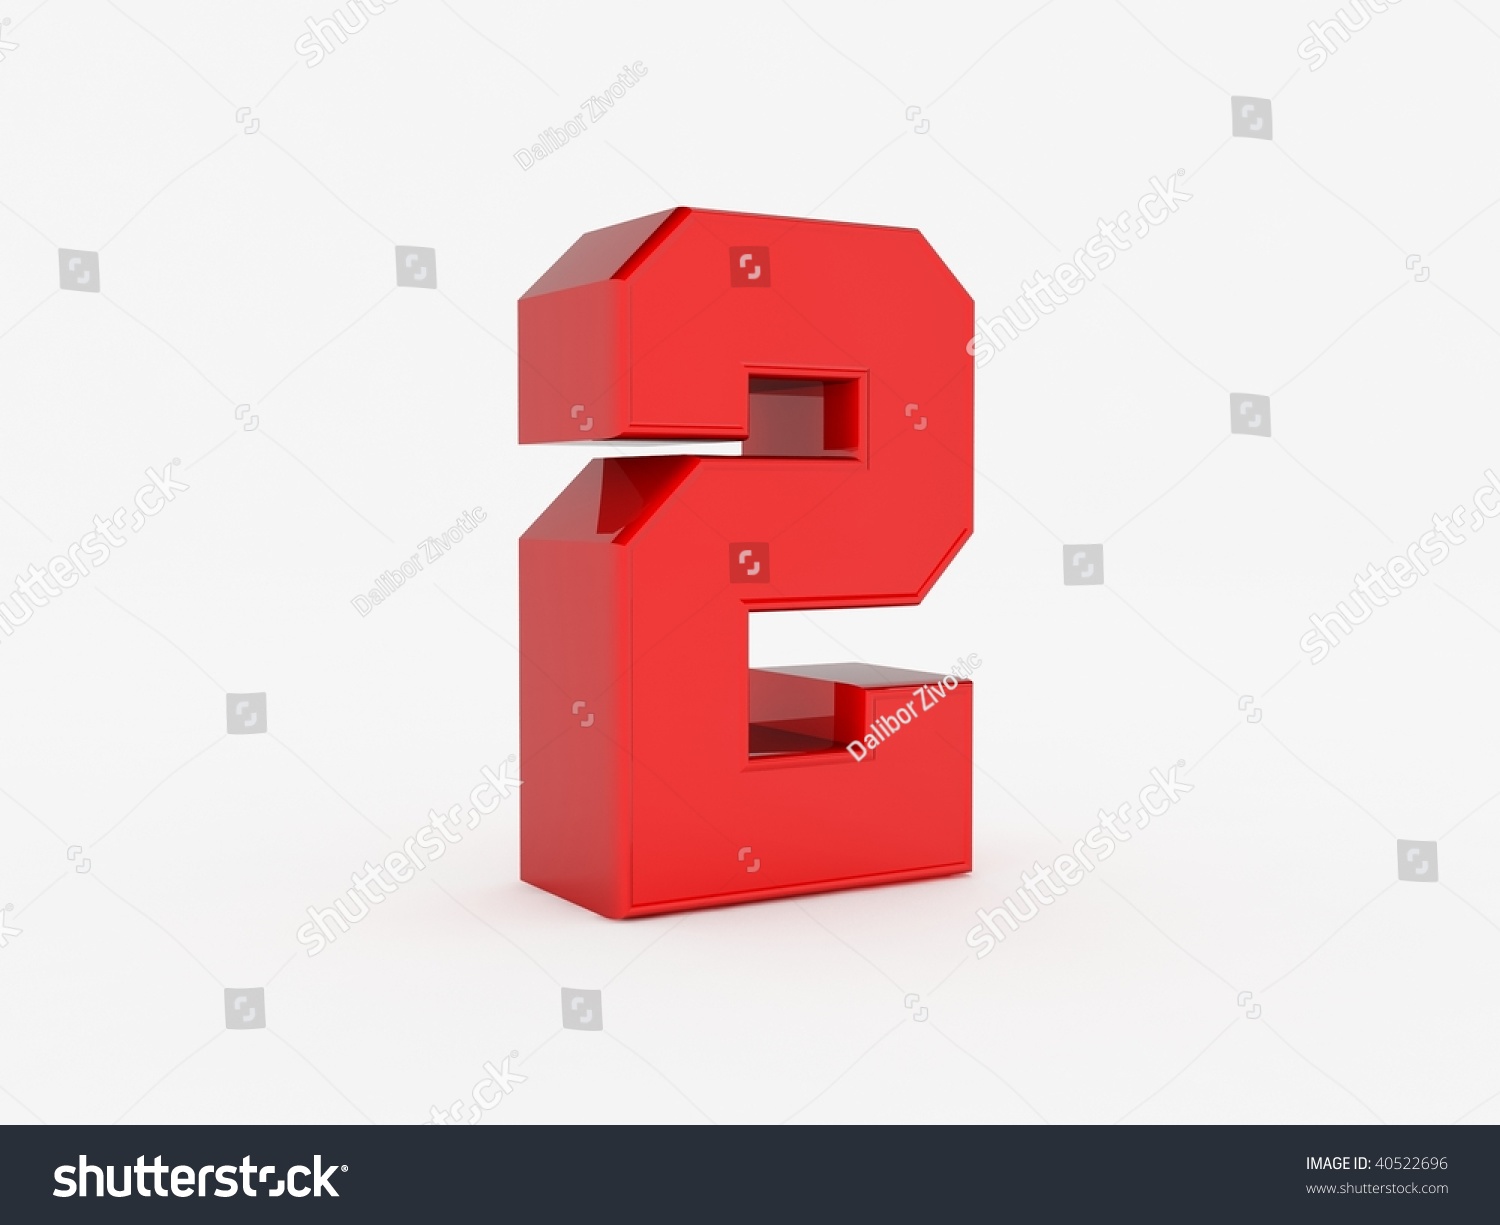 3d Rendering Of The Number 2 Stock Photo 40522696 : Shutterstock